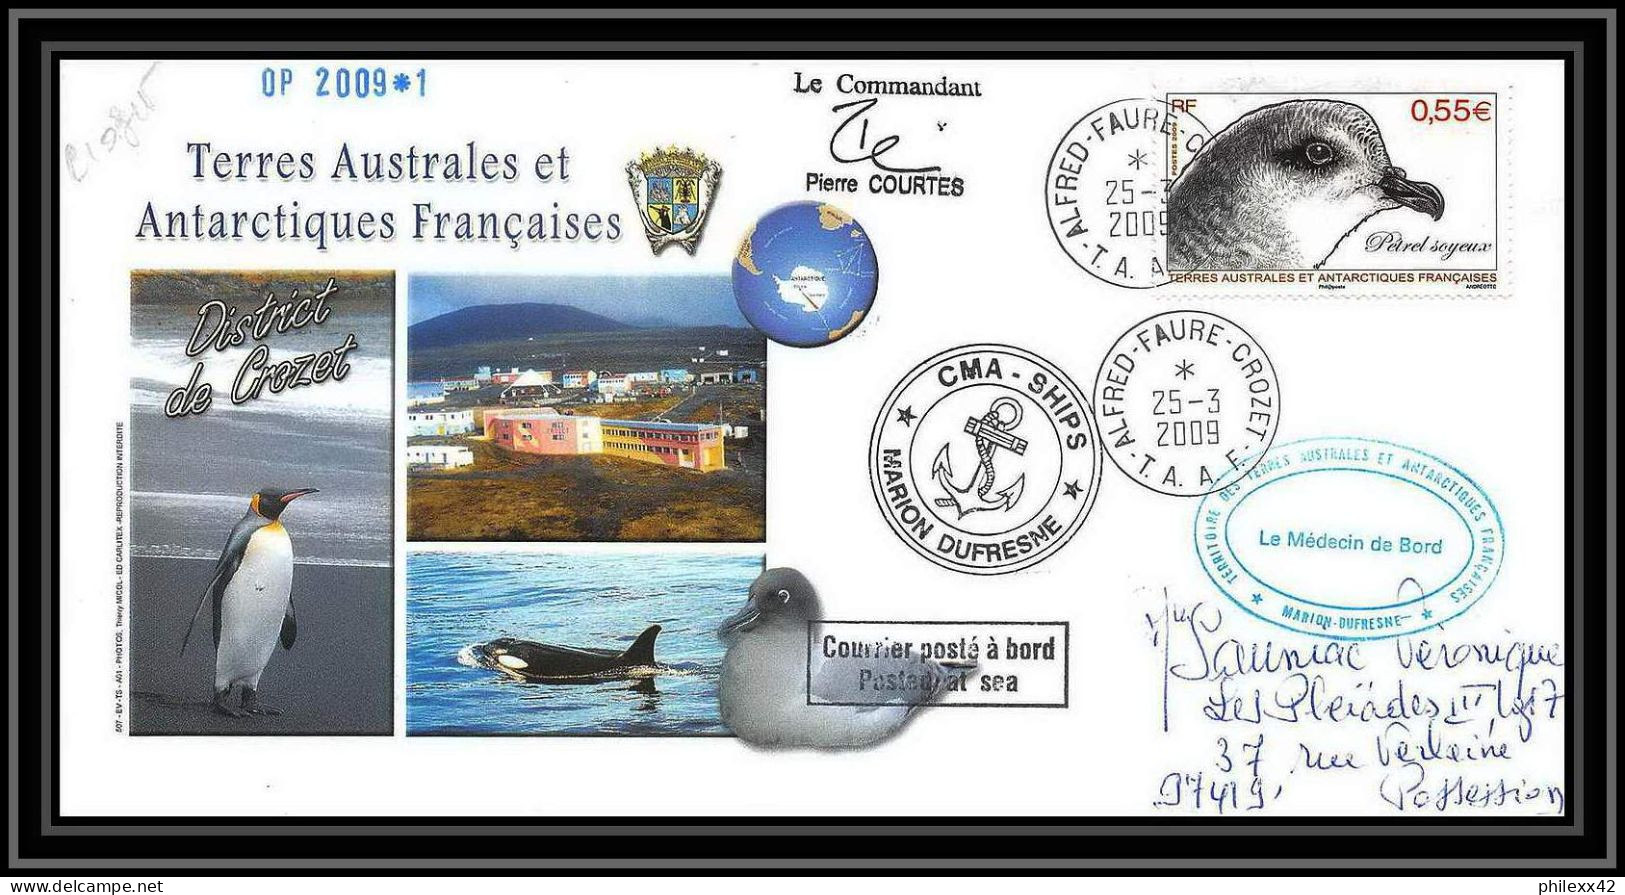 2891 Helilagon Dufresne Signé Signed OP 2009/1 Crozet 25/3/2009 N°534 ANTARCTIC Terres Australes (taaf) Lettre Cover - Helicopters